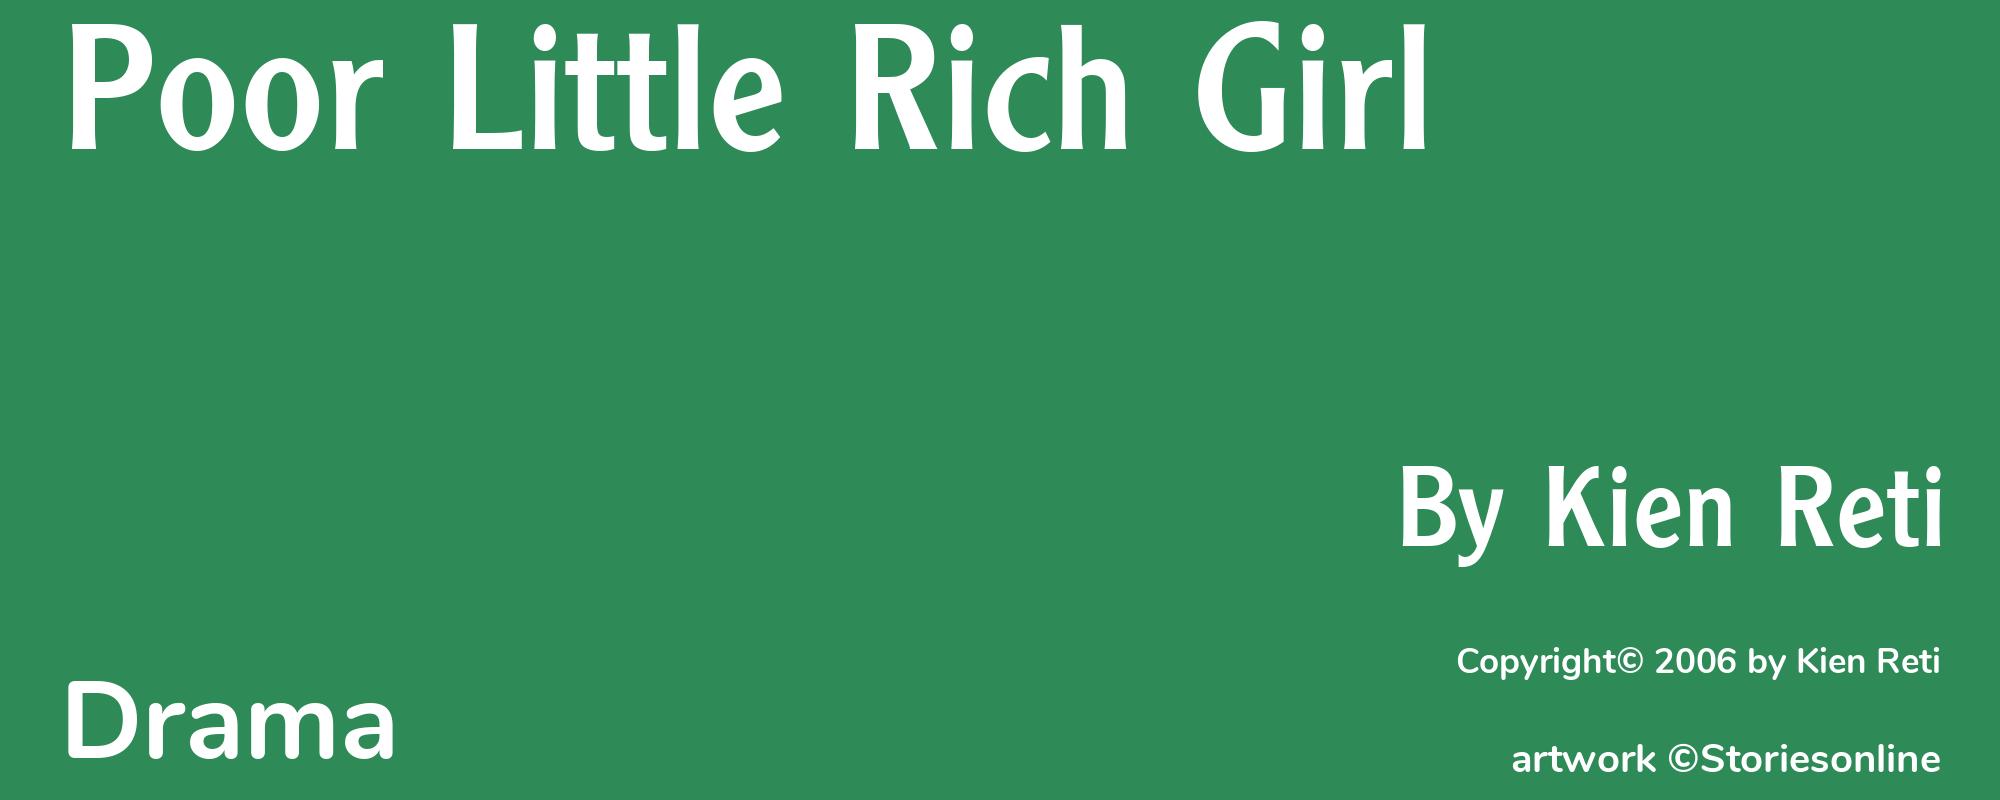 Poor Little Rich Girl - Cover